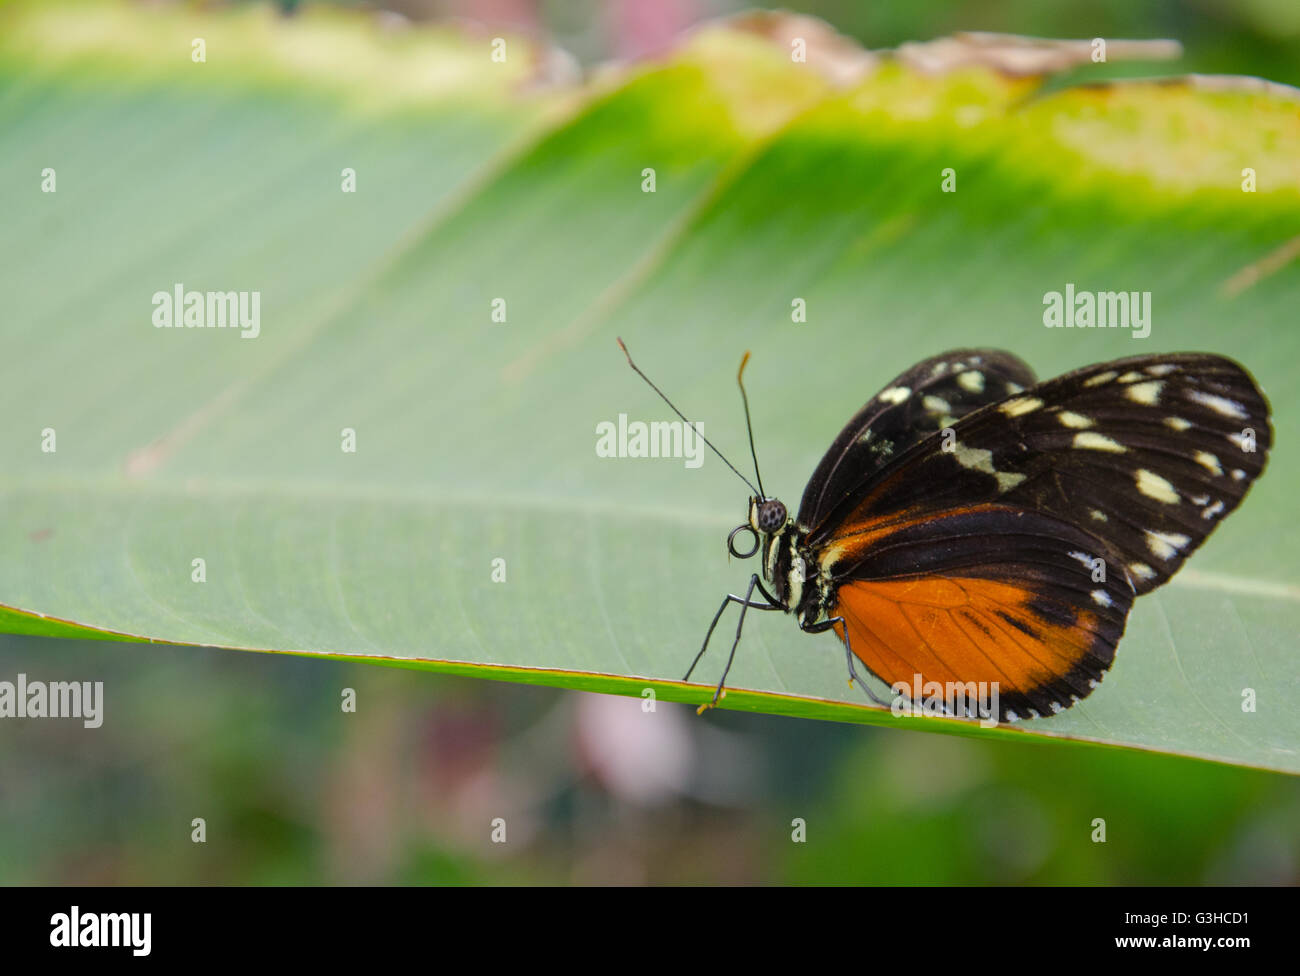 Heliconius hecale butterfly sitting on a leaf Stock Photo